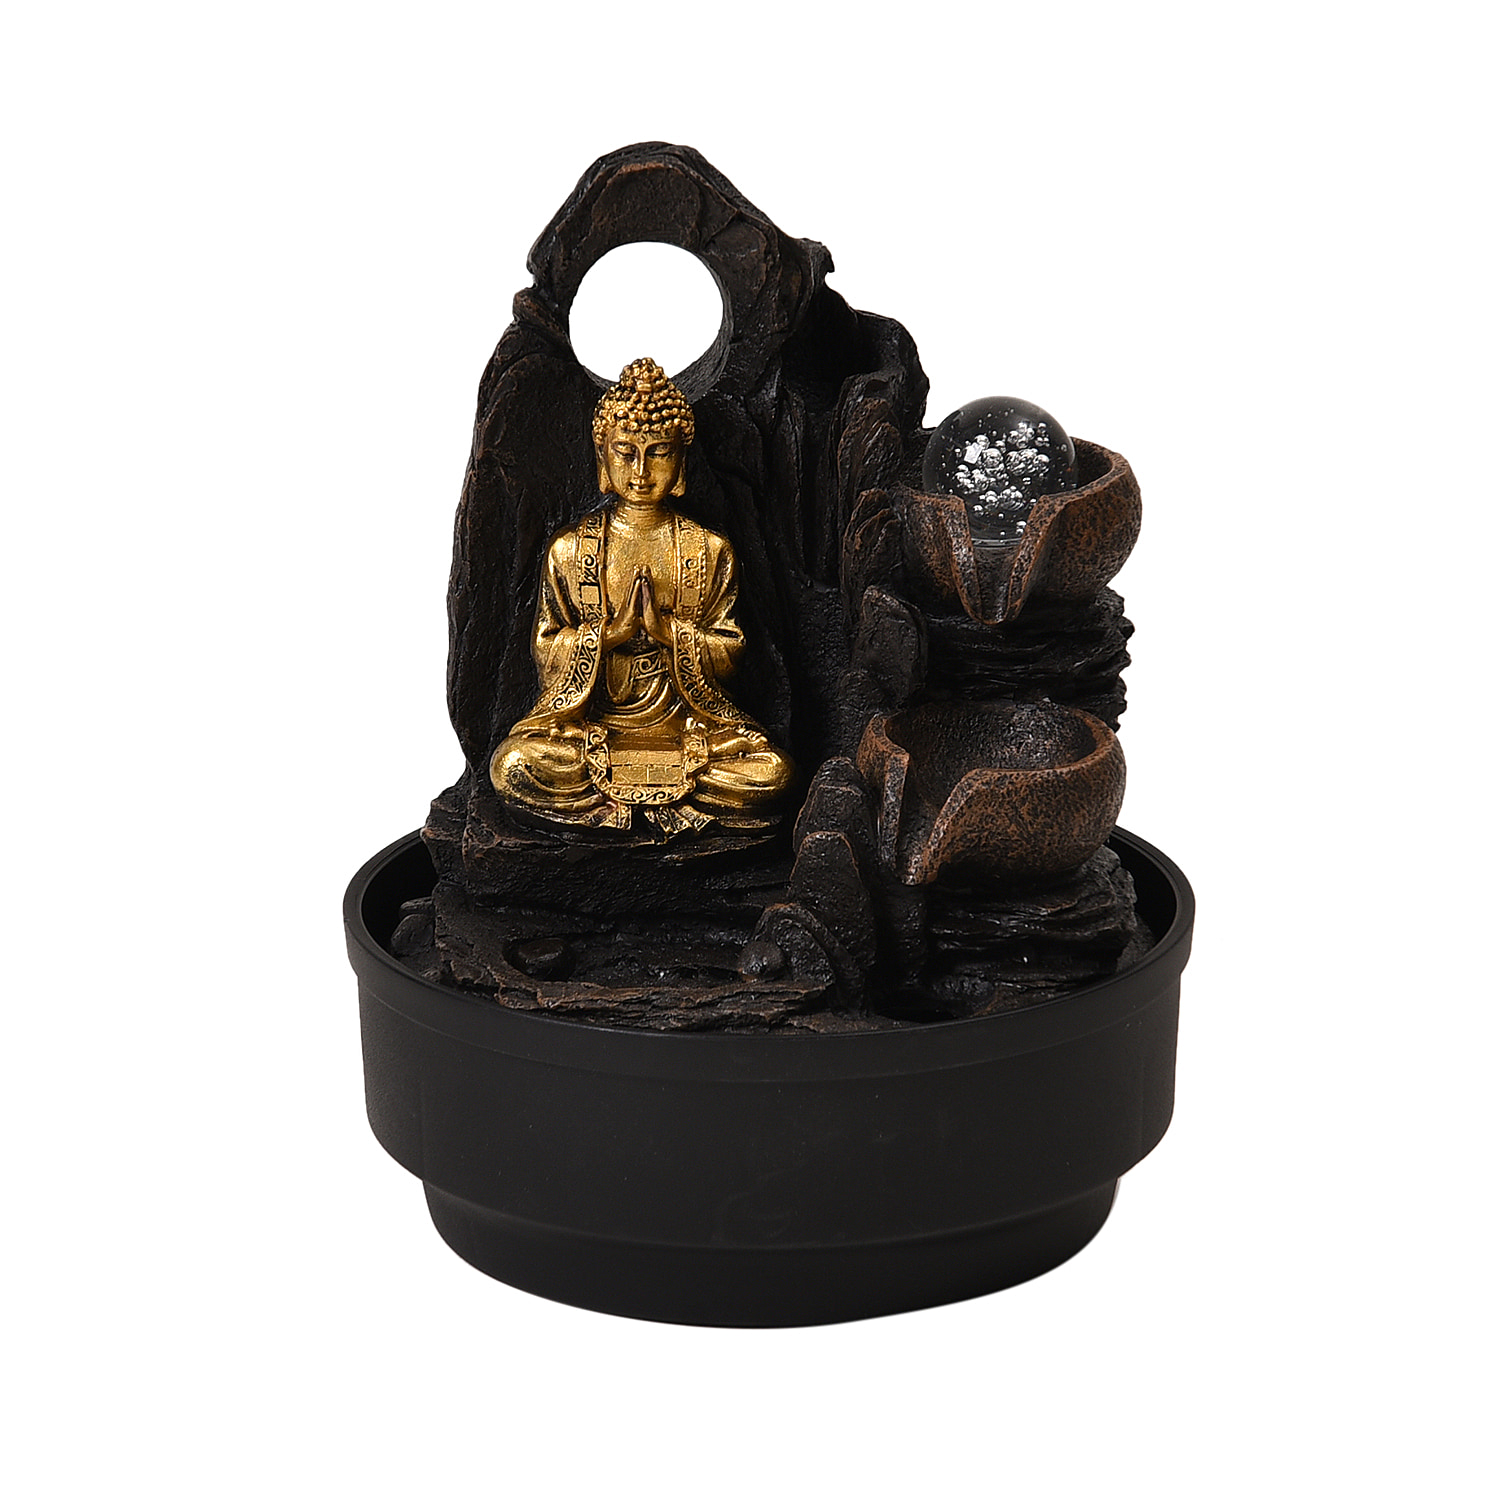 2-In-1 Buddha Water Fountain and Incense Burner With Light (30pcs Incense)